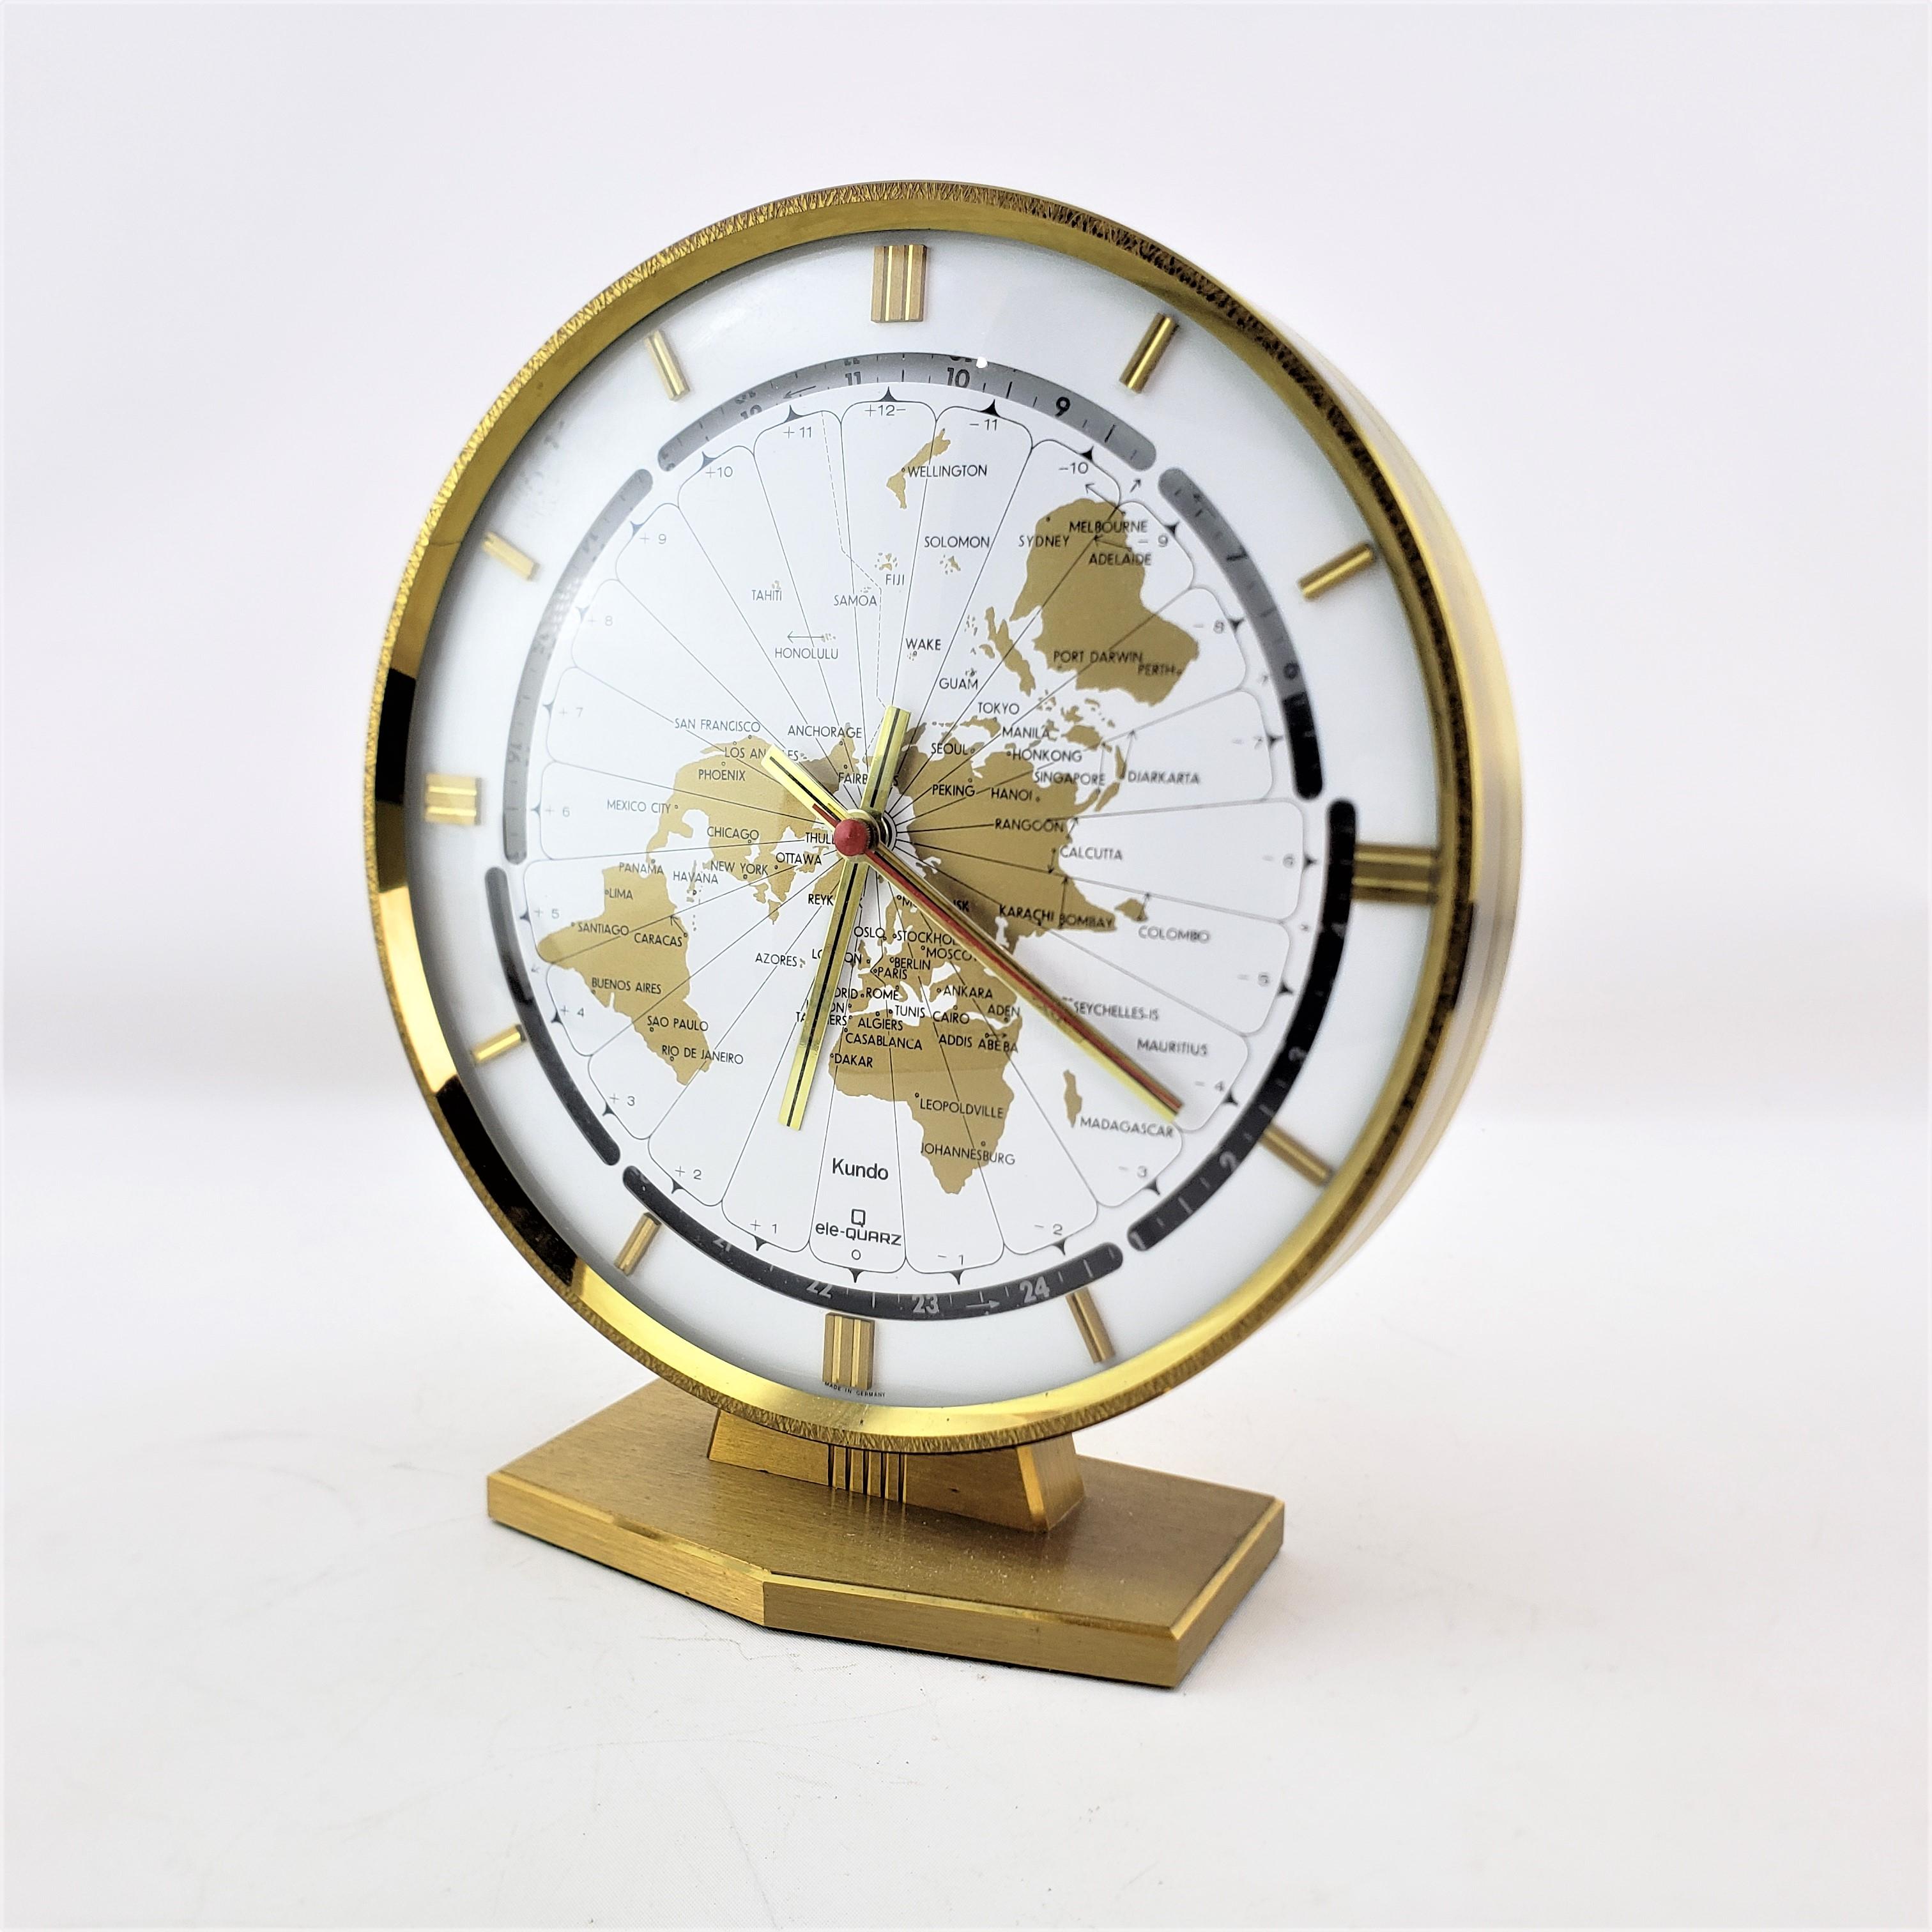 This clock was made by the well known Kundo clock company of Germany and dates to approximately 1970 and done in a Mid-Century Modern style. This World globe clock shows the various time zones on the face, with a black and light indicator band to